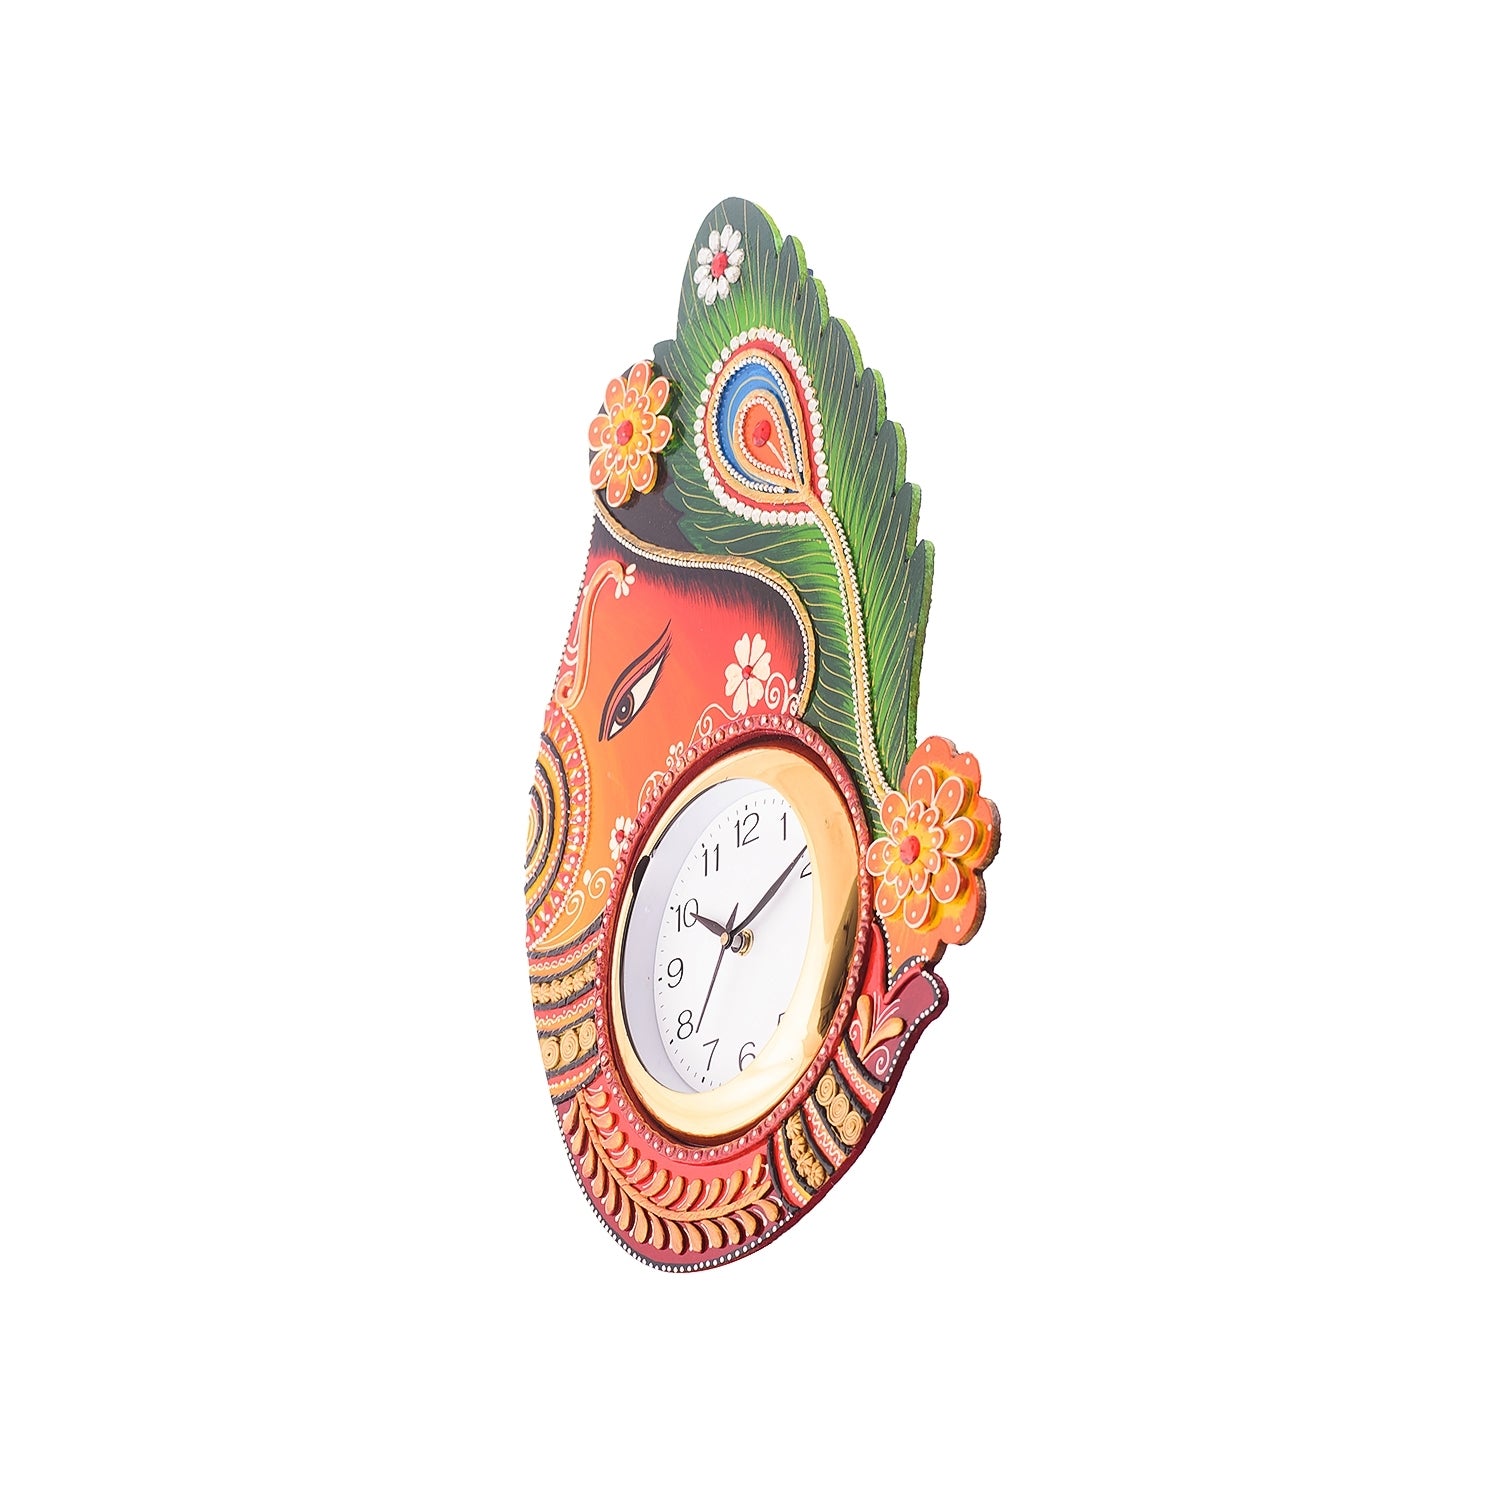 Colorful Handicrafted Paper Mache Wooden Turban Lord Ganesha Wall Clock 4